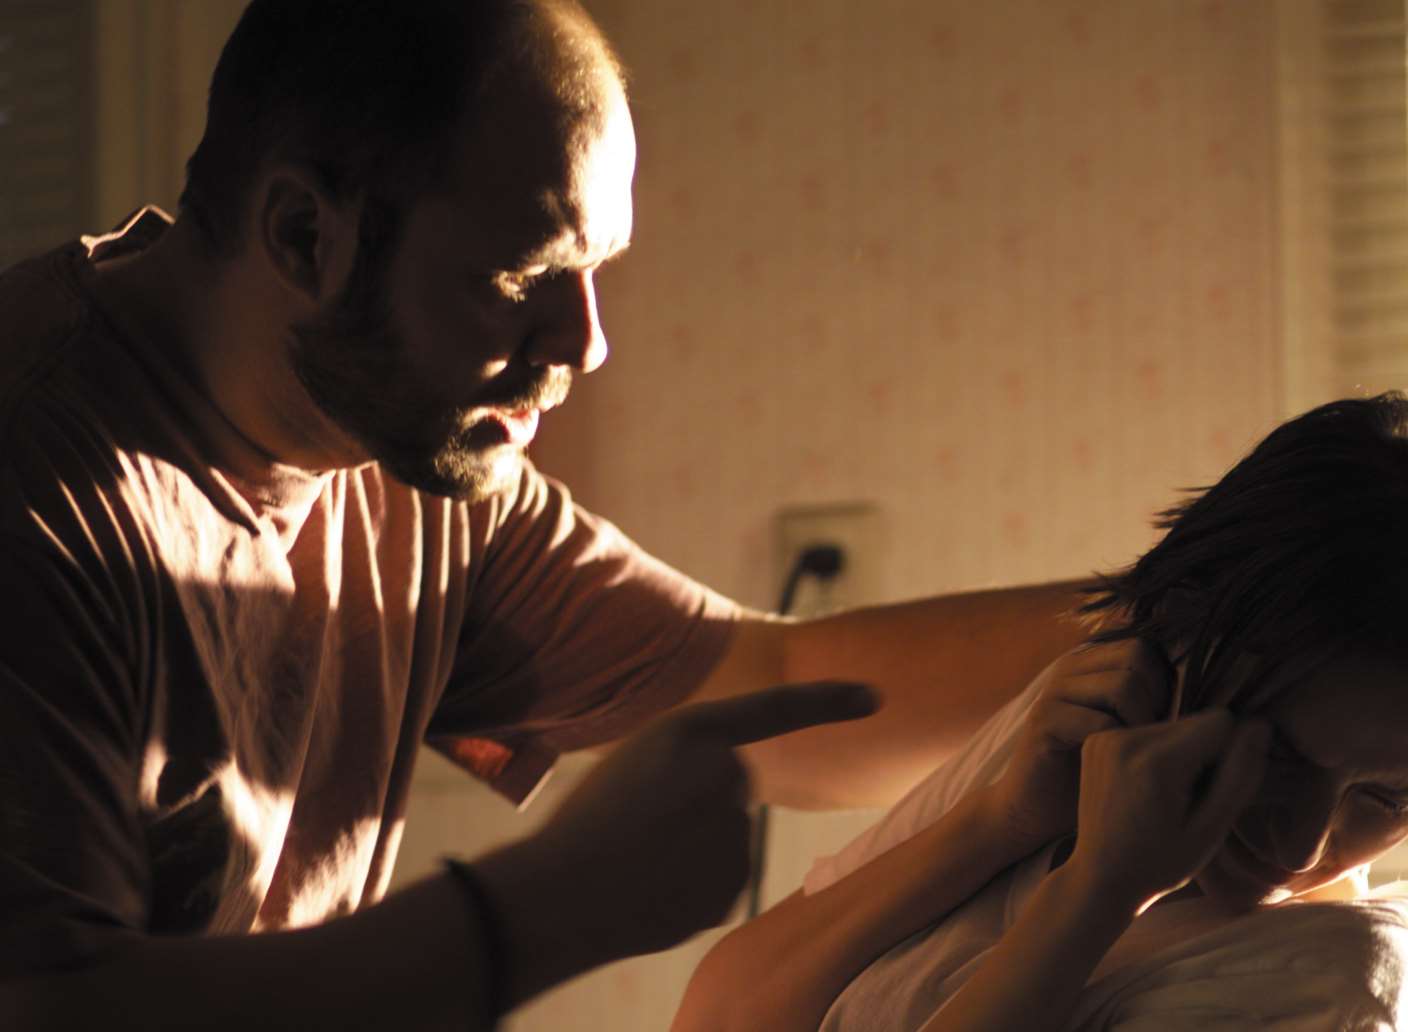 Domestic abuse reports are often reported to police. Thinkstock image